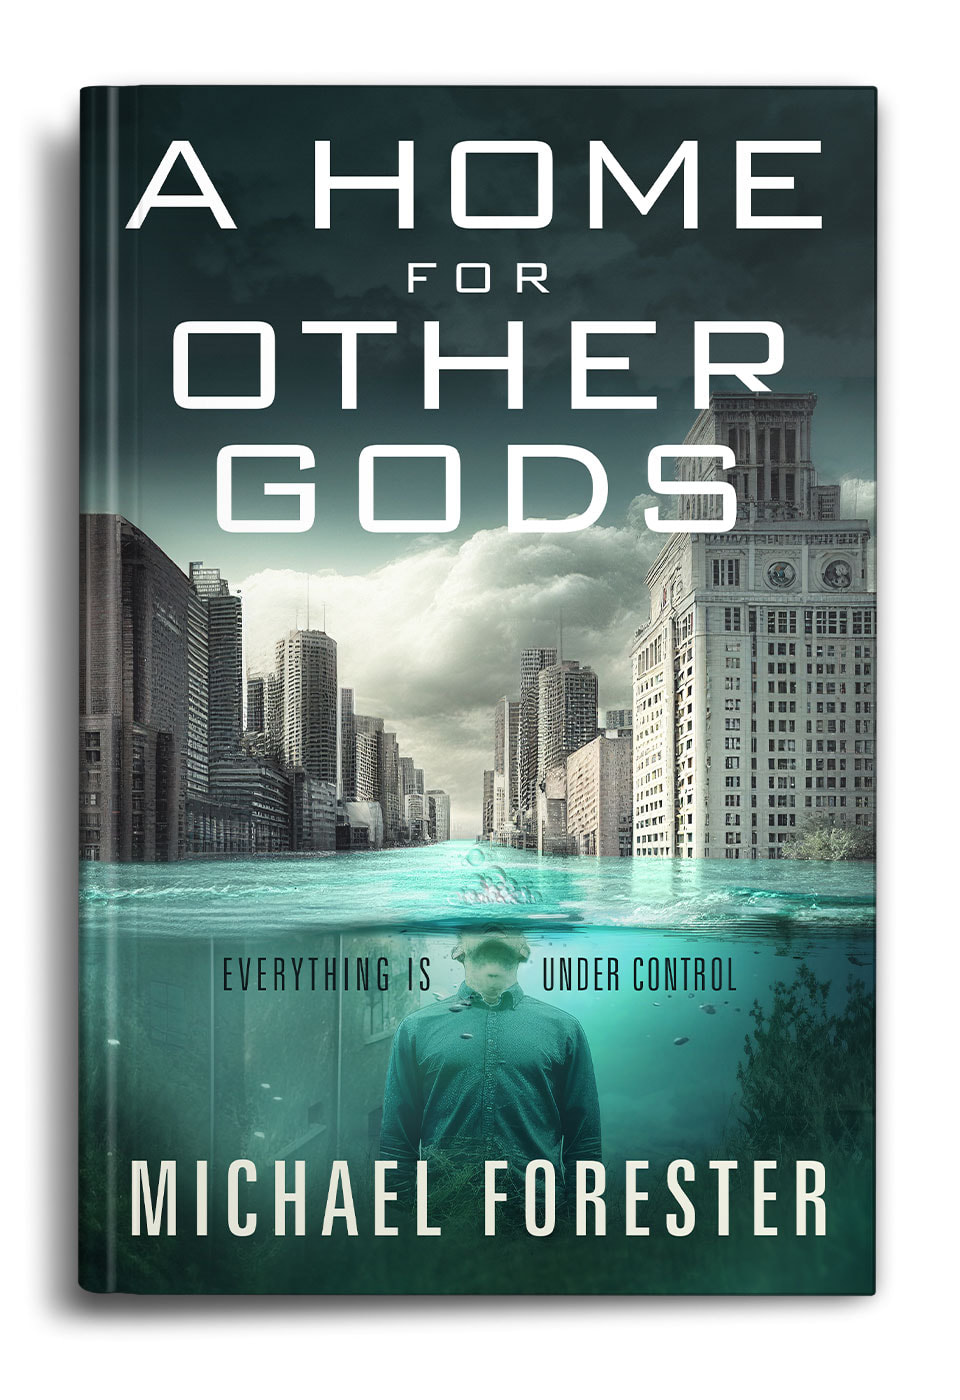 A-Home-for-Other-Gods-by-Michael-Forrester